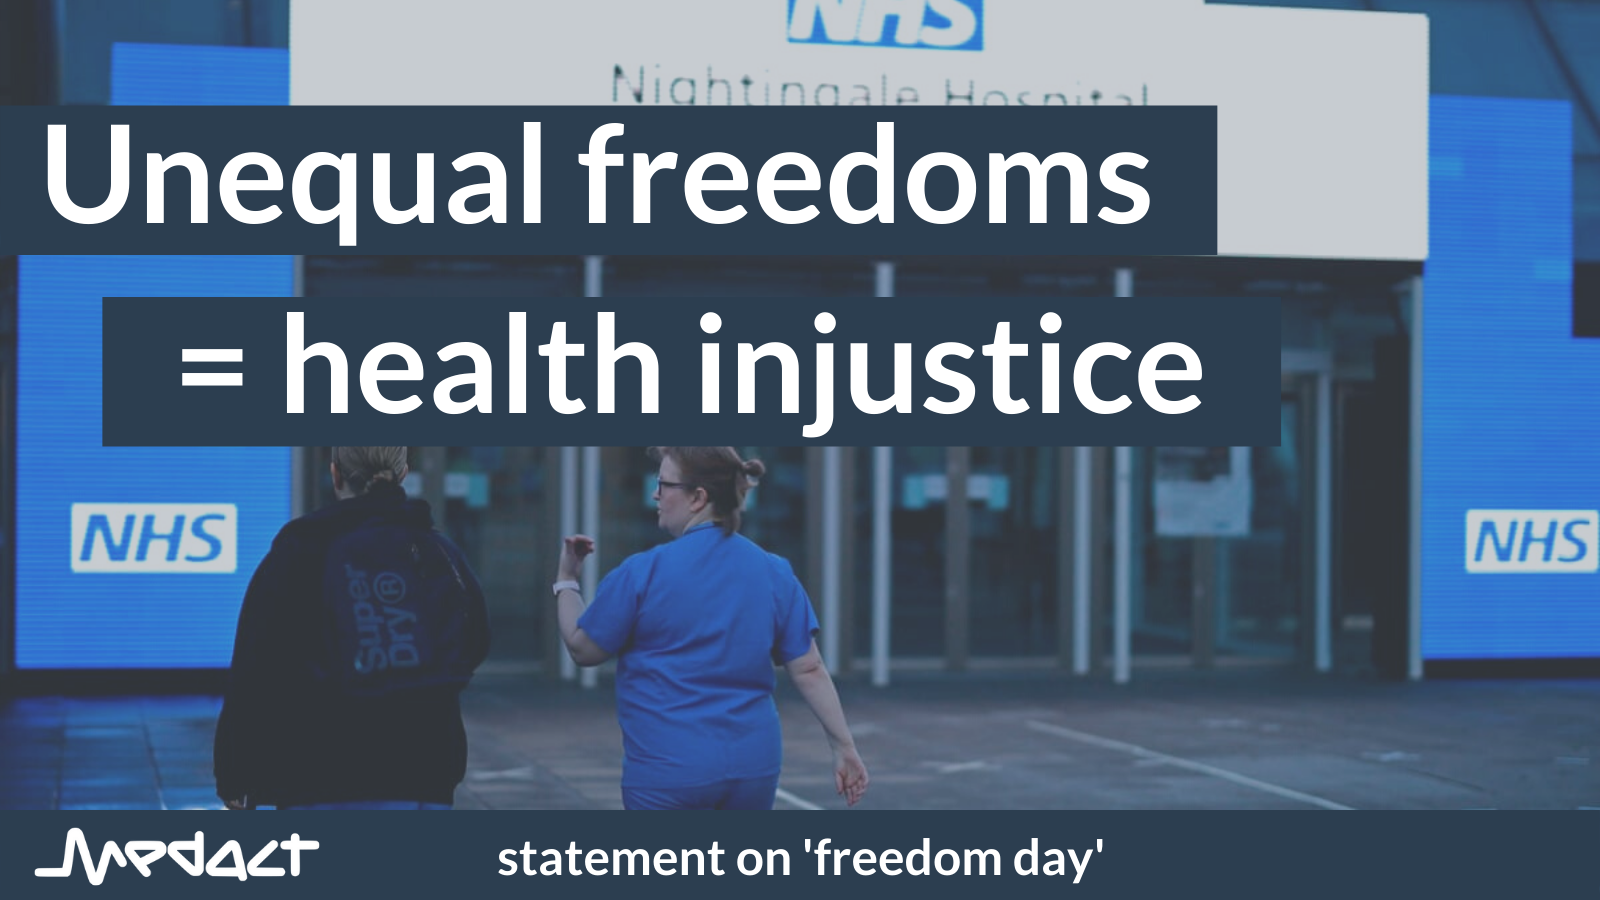 UNEQUAL FREEDOMS = HEALTH INJUSTICE. Medact statement on 'freedom day'